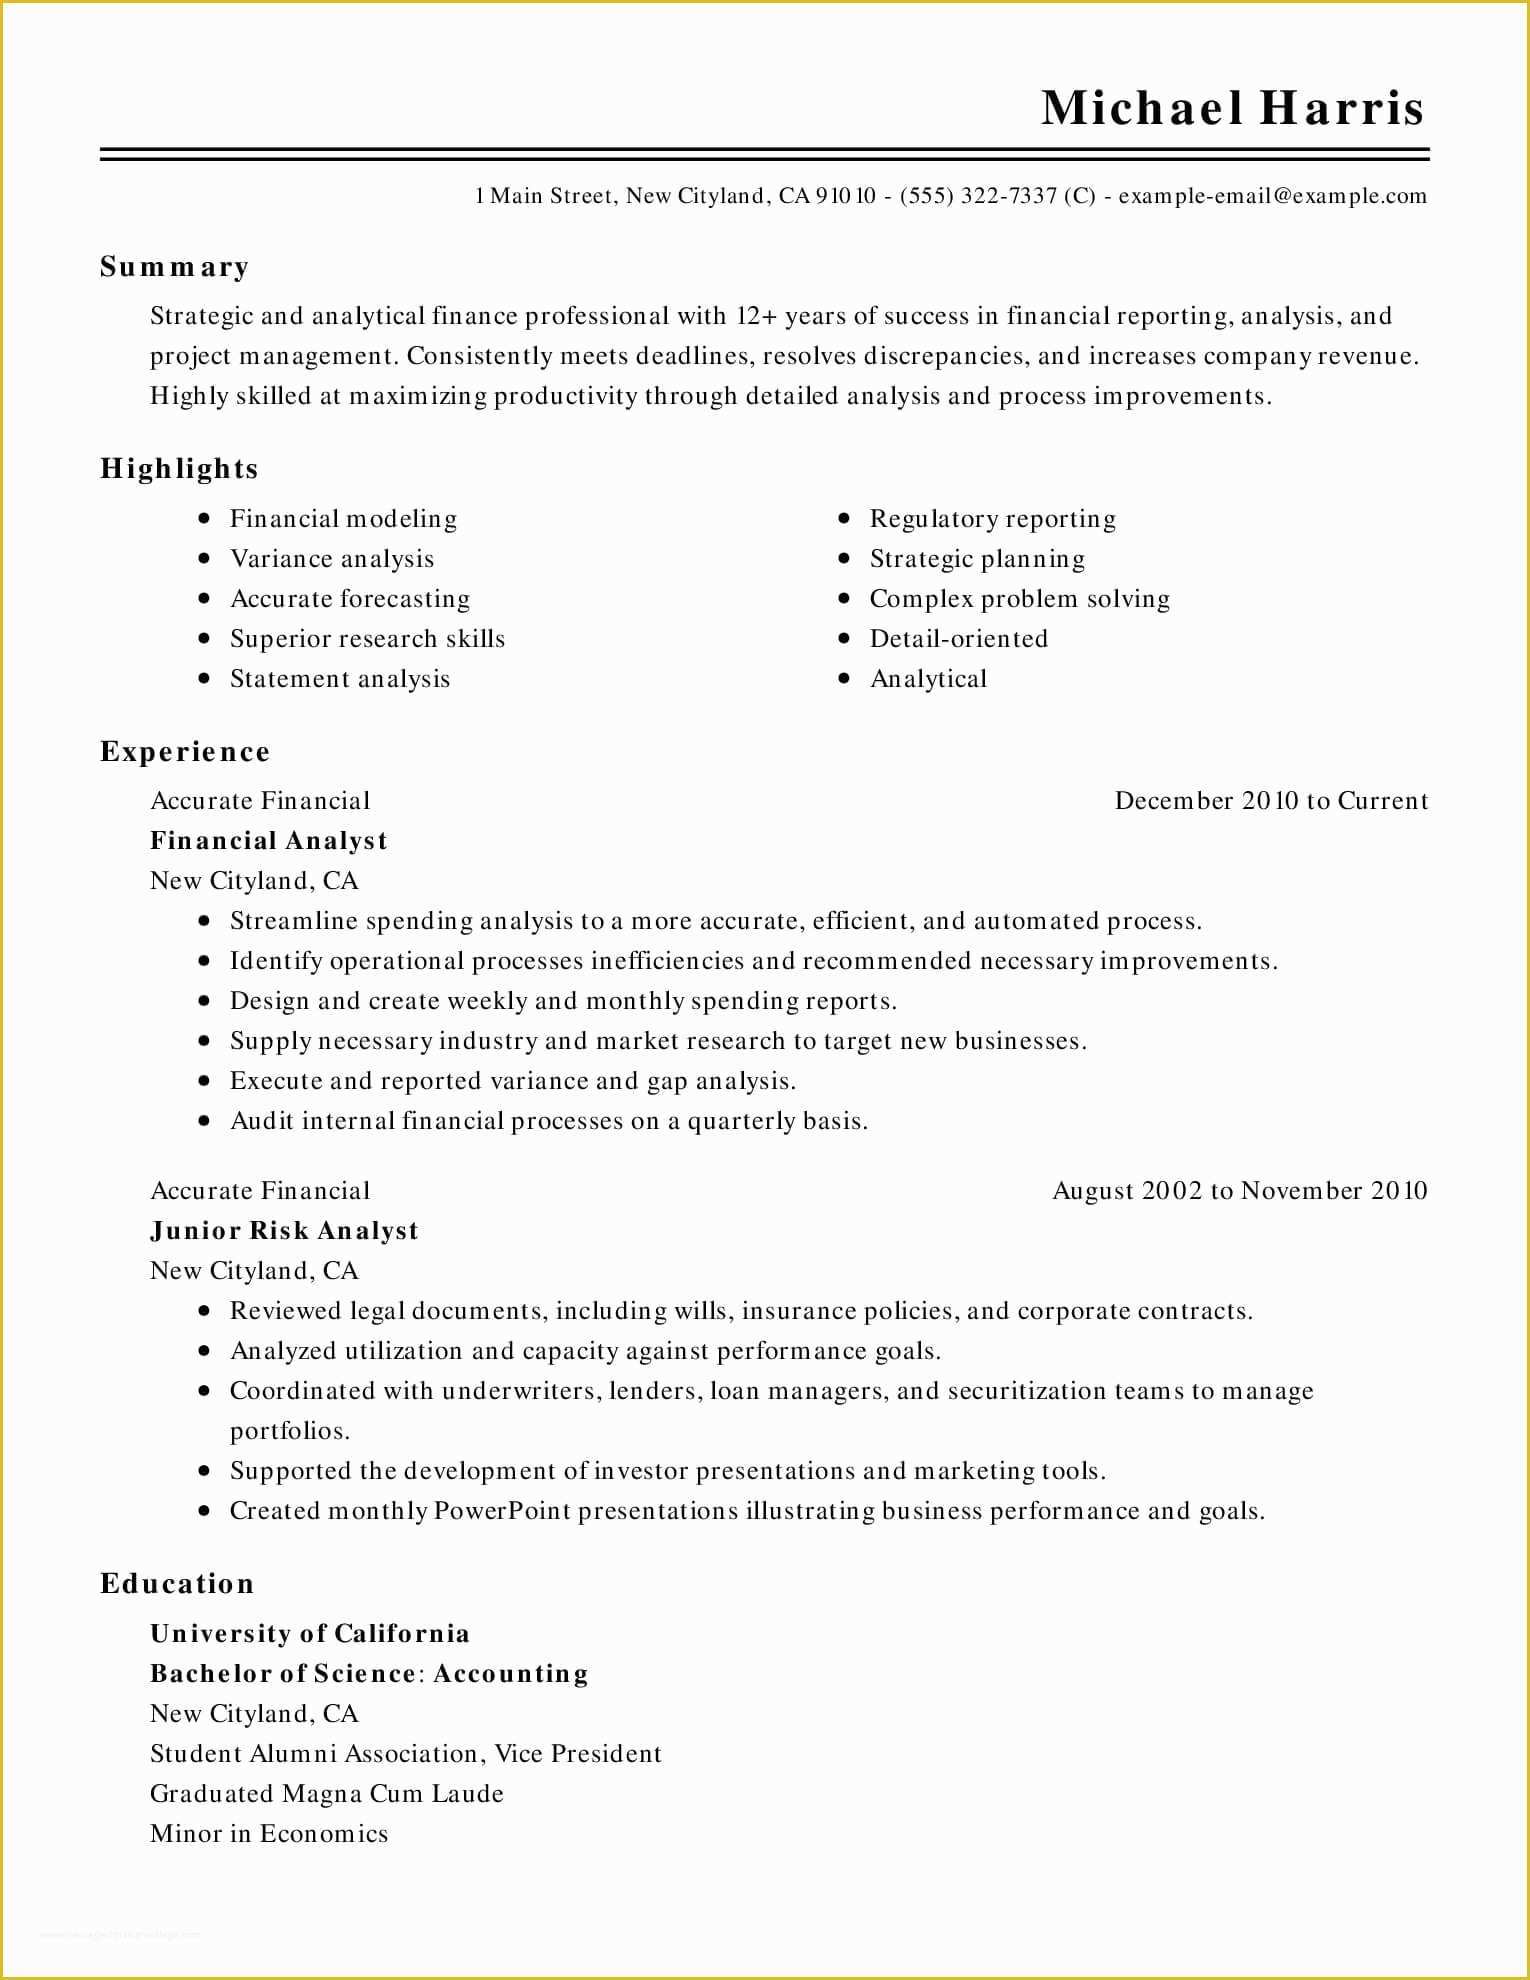 Microsoft Word Resume Templates 2011 Free Of 15 Of the Best Resume Templates for Microsoft Word Fice